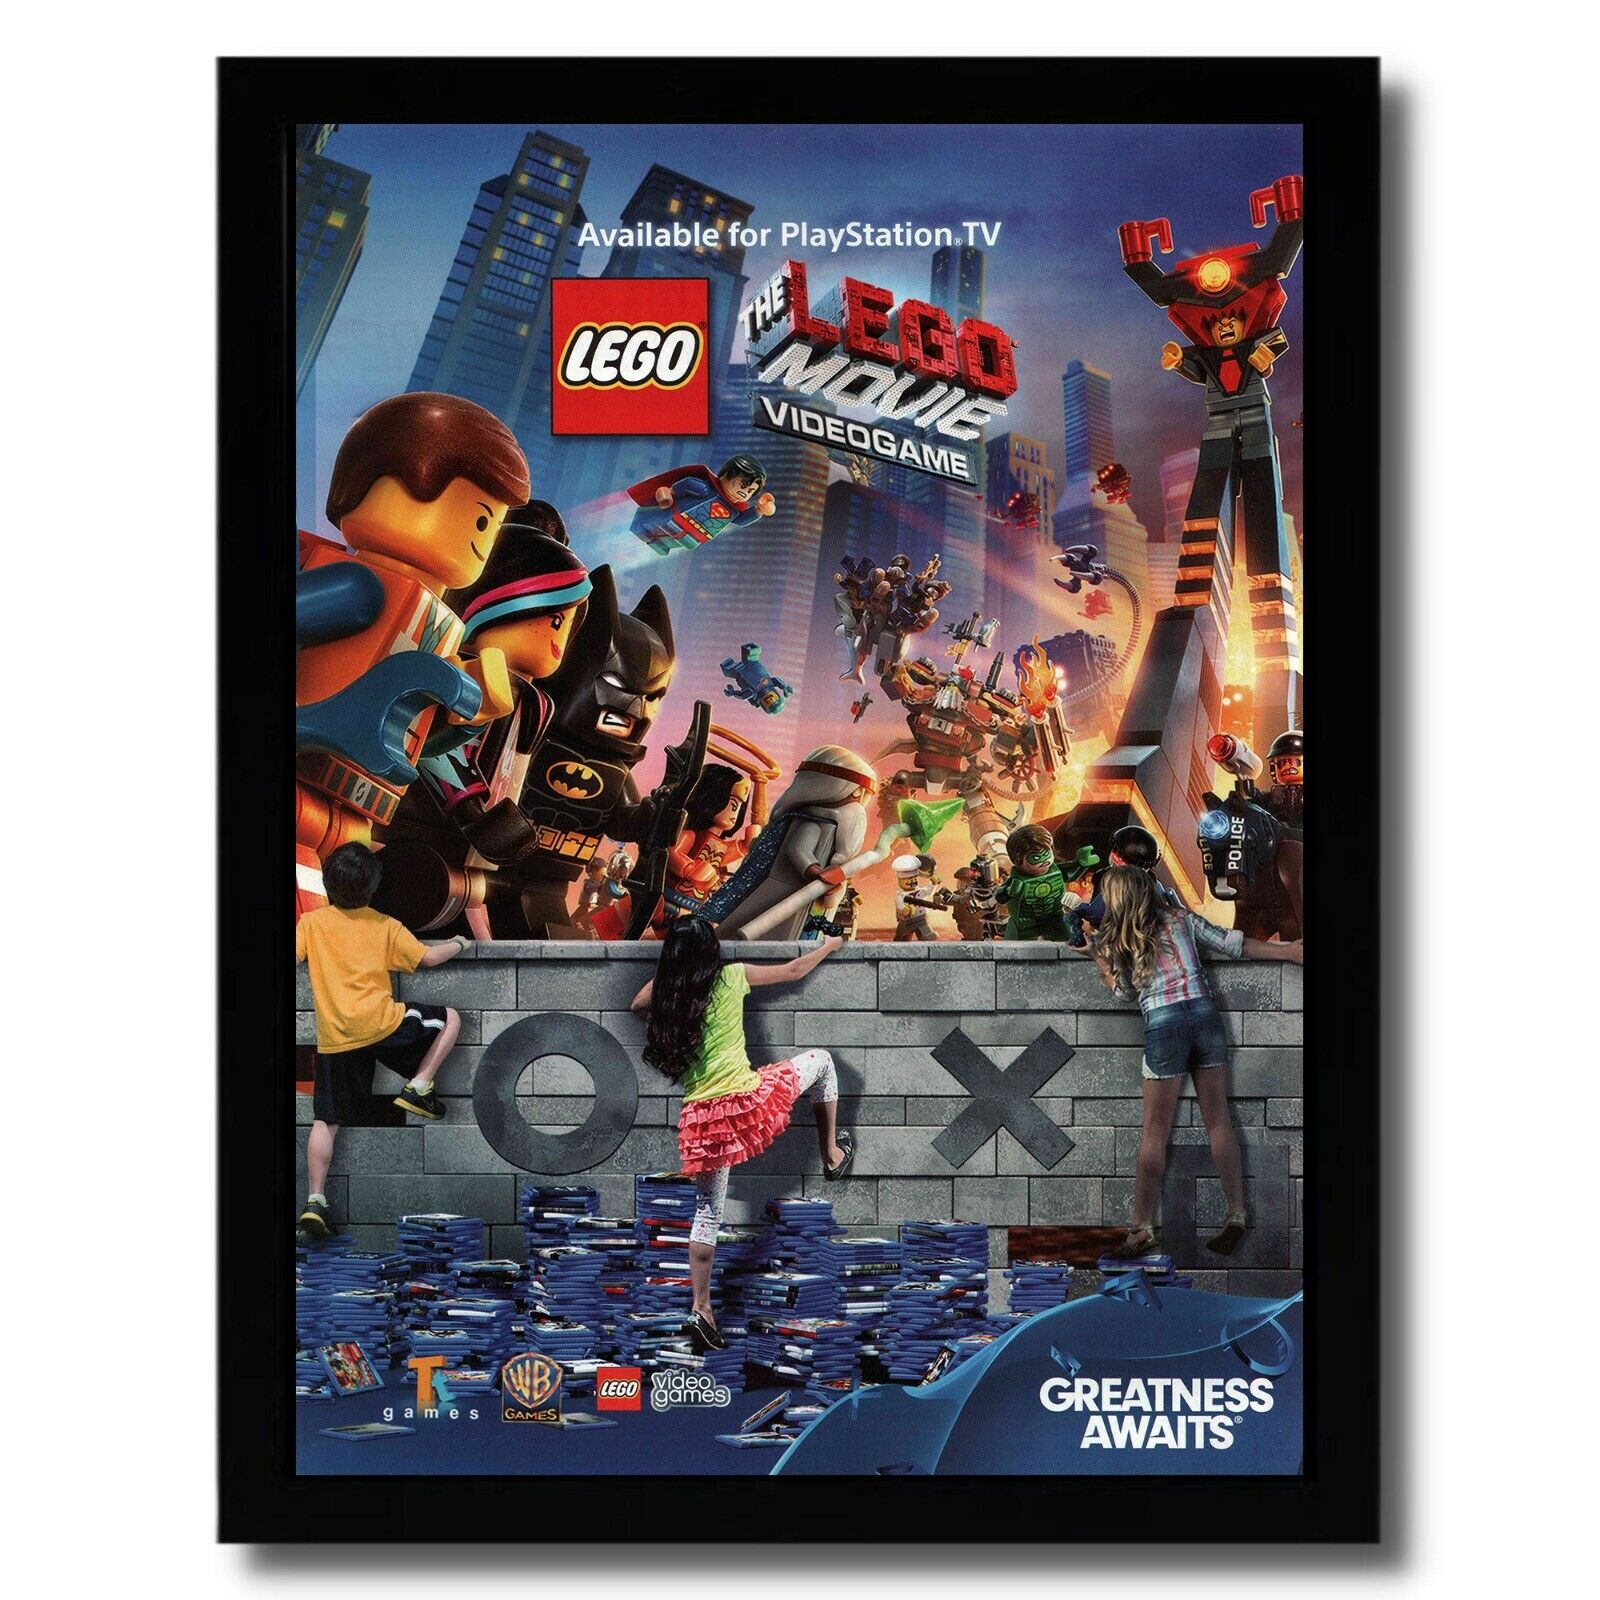 2014 The LEGO Movie Video Game Framed Print Ad/Poster PS4 Xbox One Wii U Art